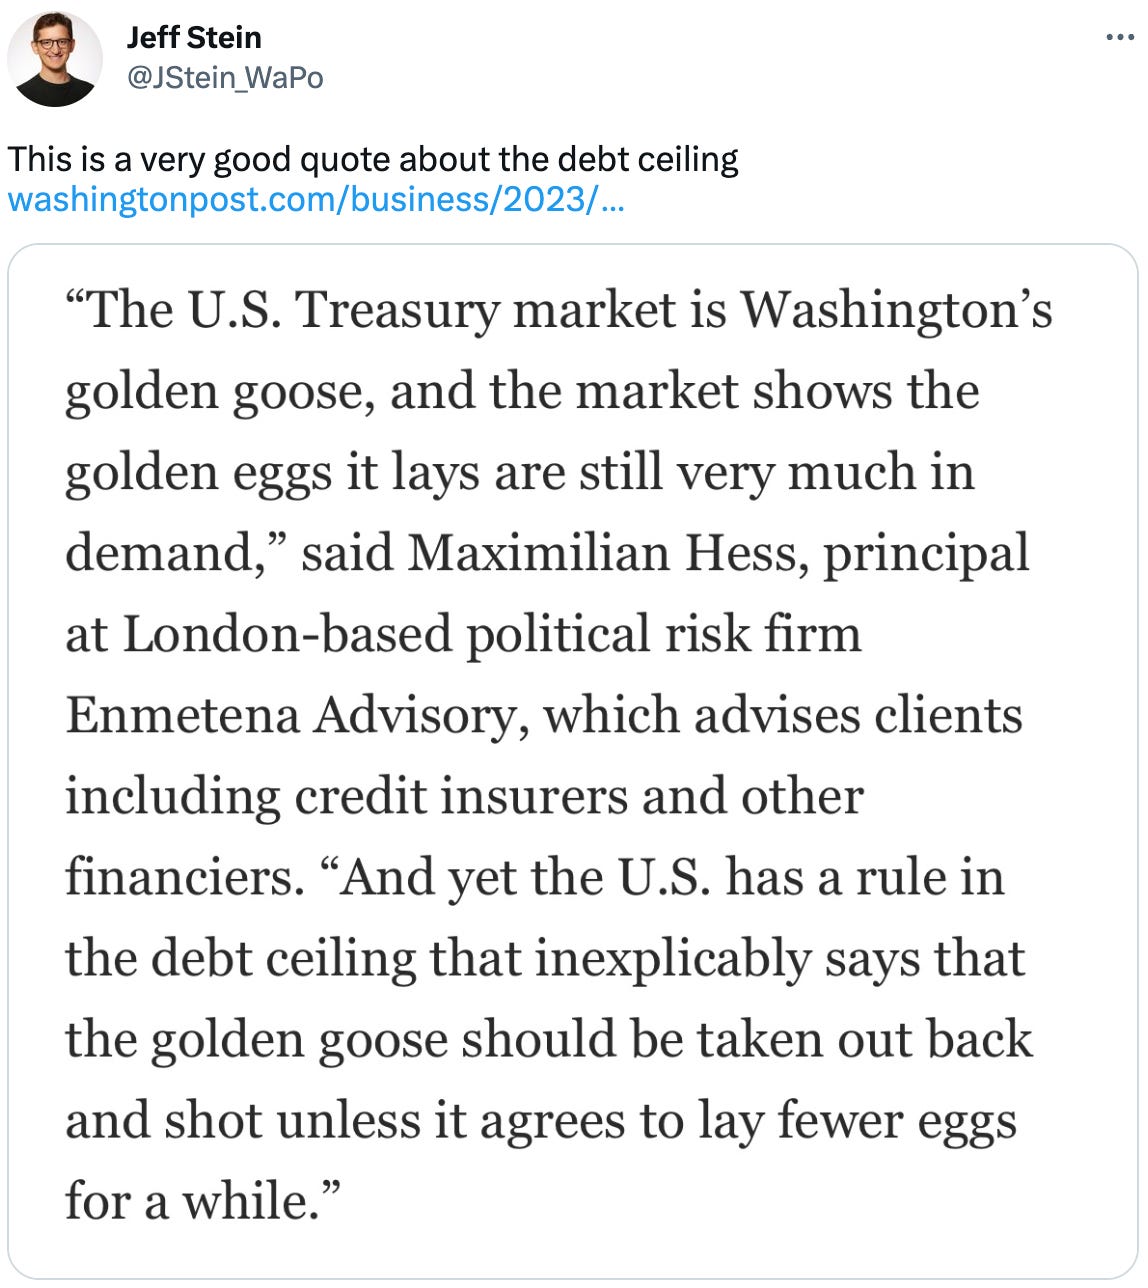  Jeff Stein @JStein_WaPo This is a very good quote about the debt ceiling https://washingtonpost.com/business/2023/05/19/world-watches-us-debt-ceiling-worries-default/